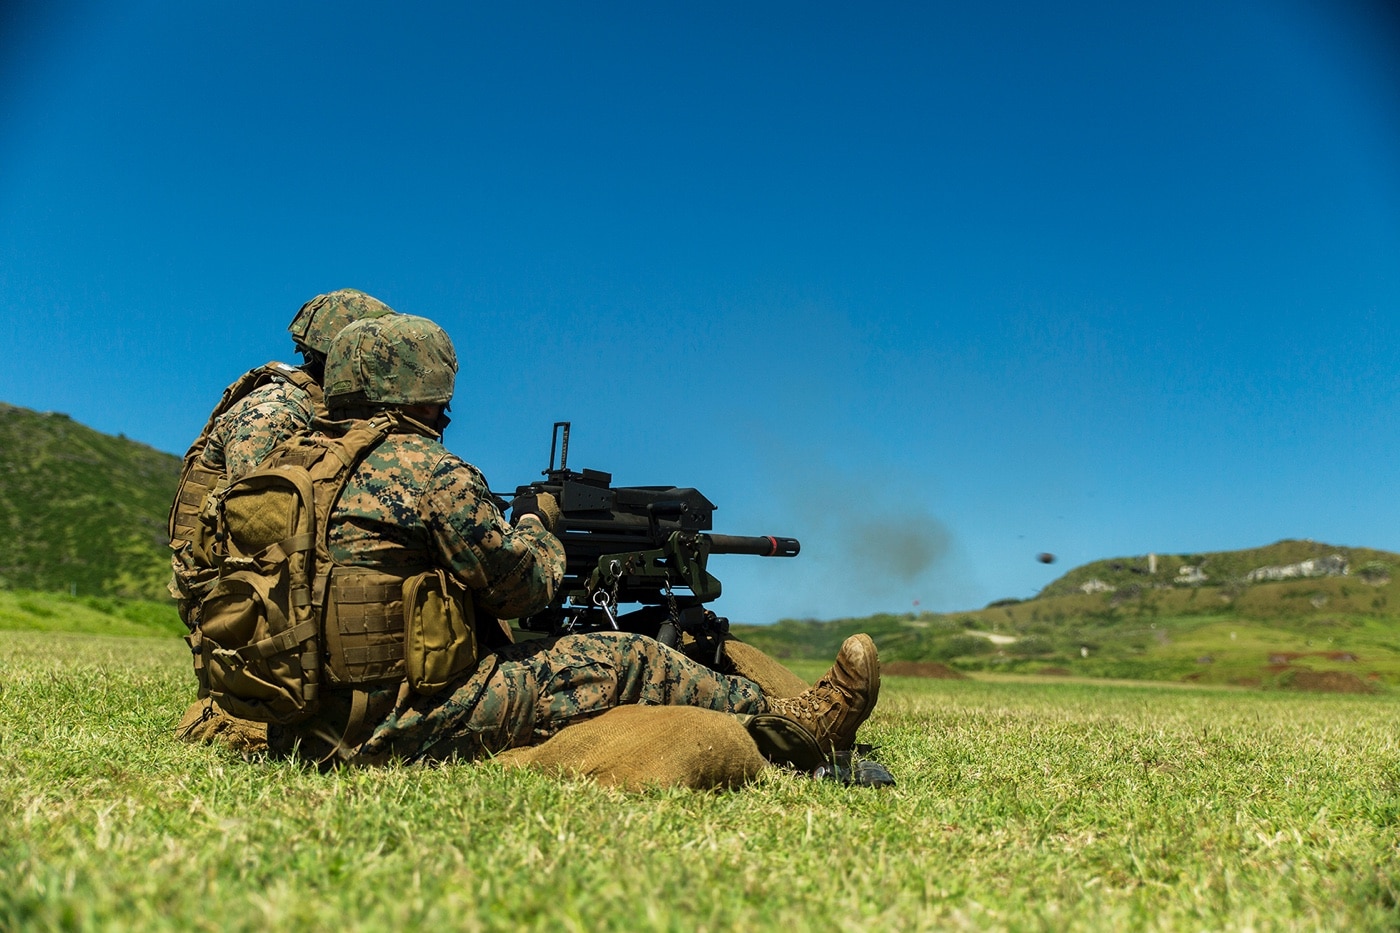 Shown is a pair of Marines shooting a Mk-19 grenade launcher during training in Japan. They are wearing their green camo utilities and helmets with full body armor. There is a hill in the background, green grass everywhere and a bright blue sky.